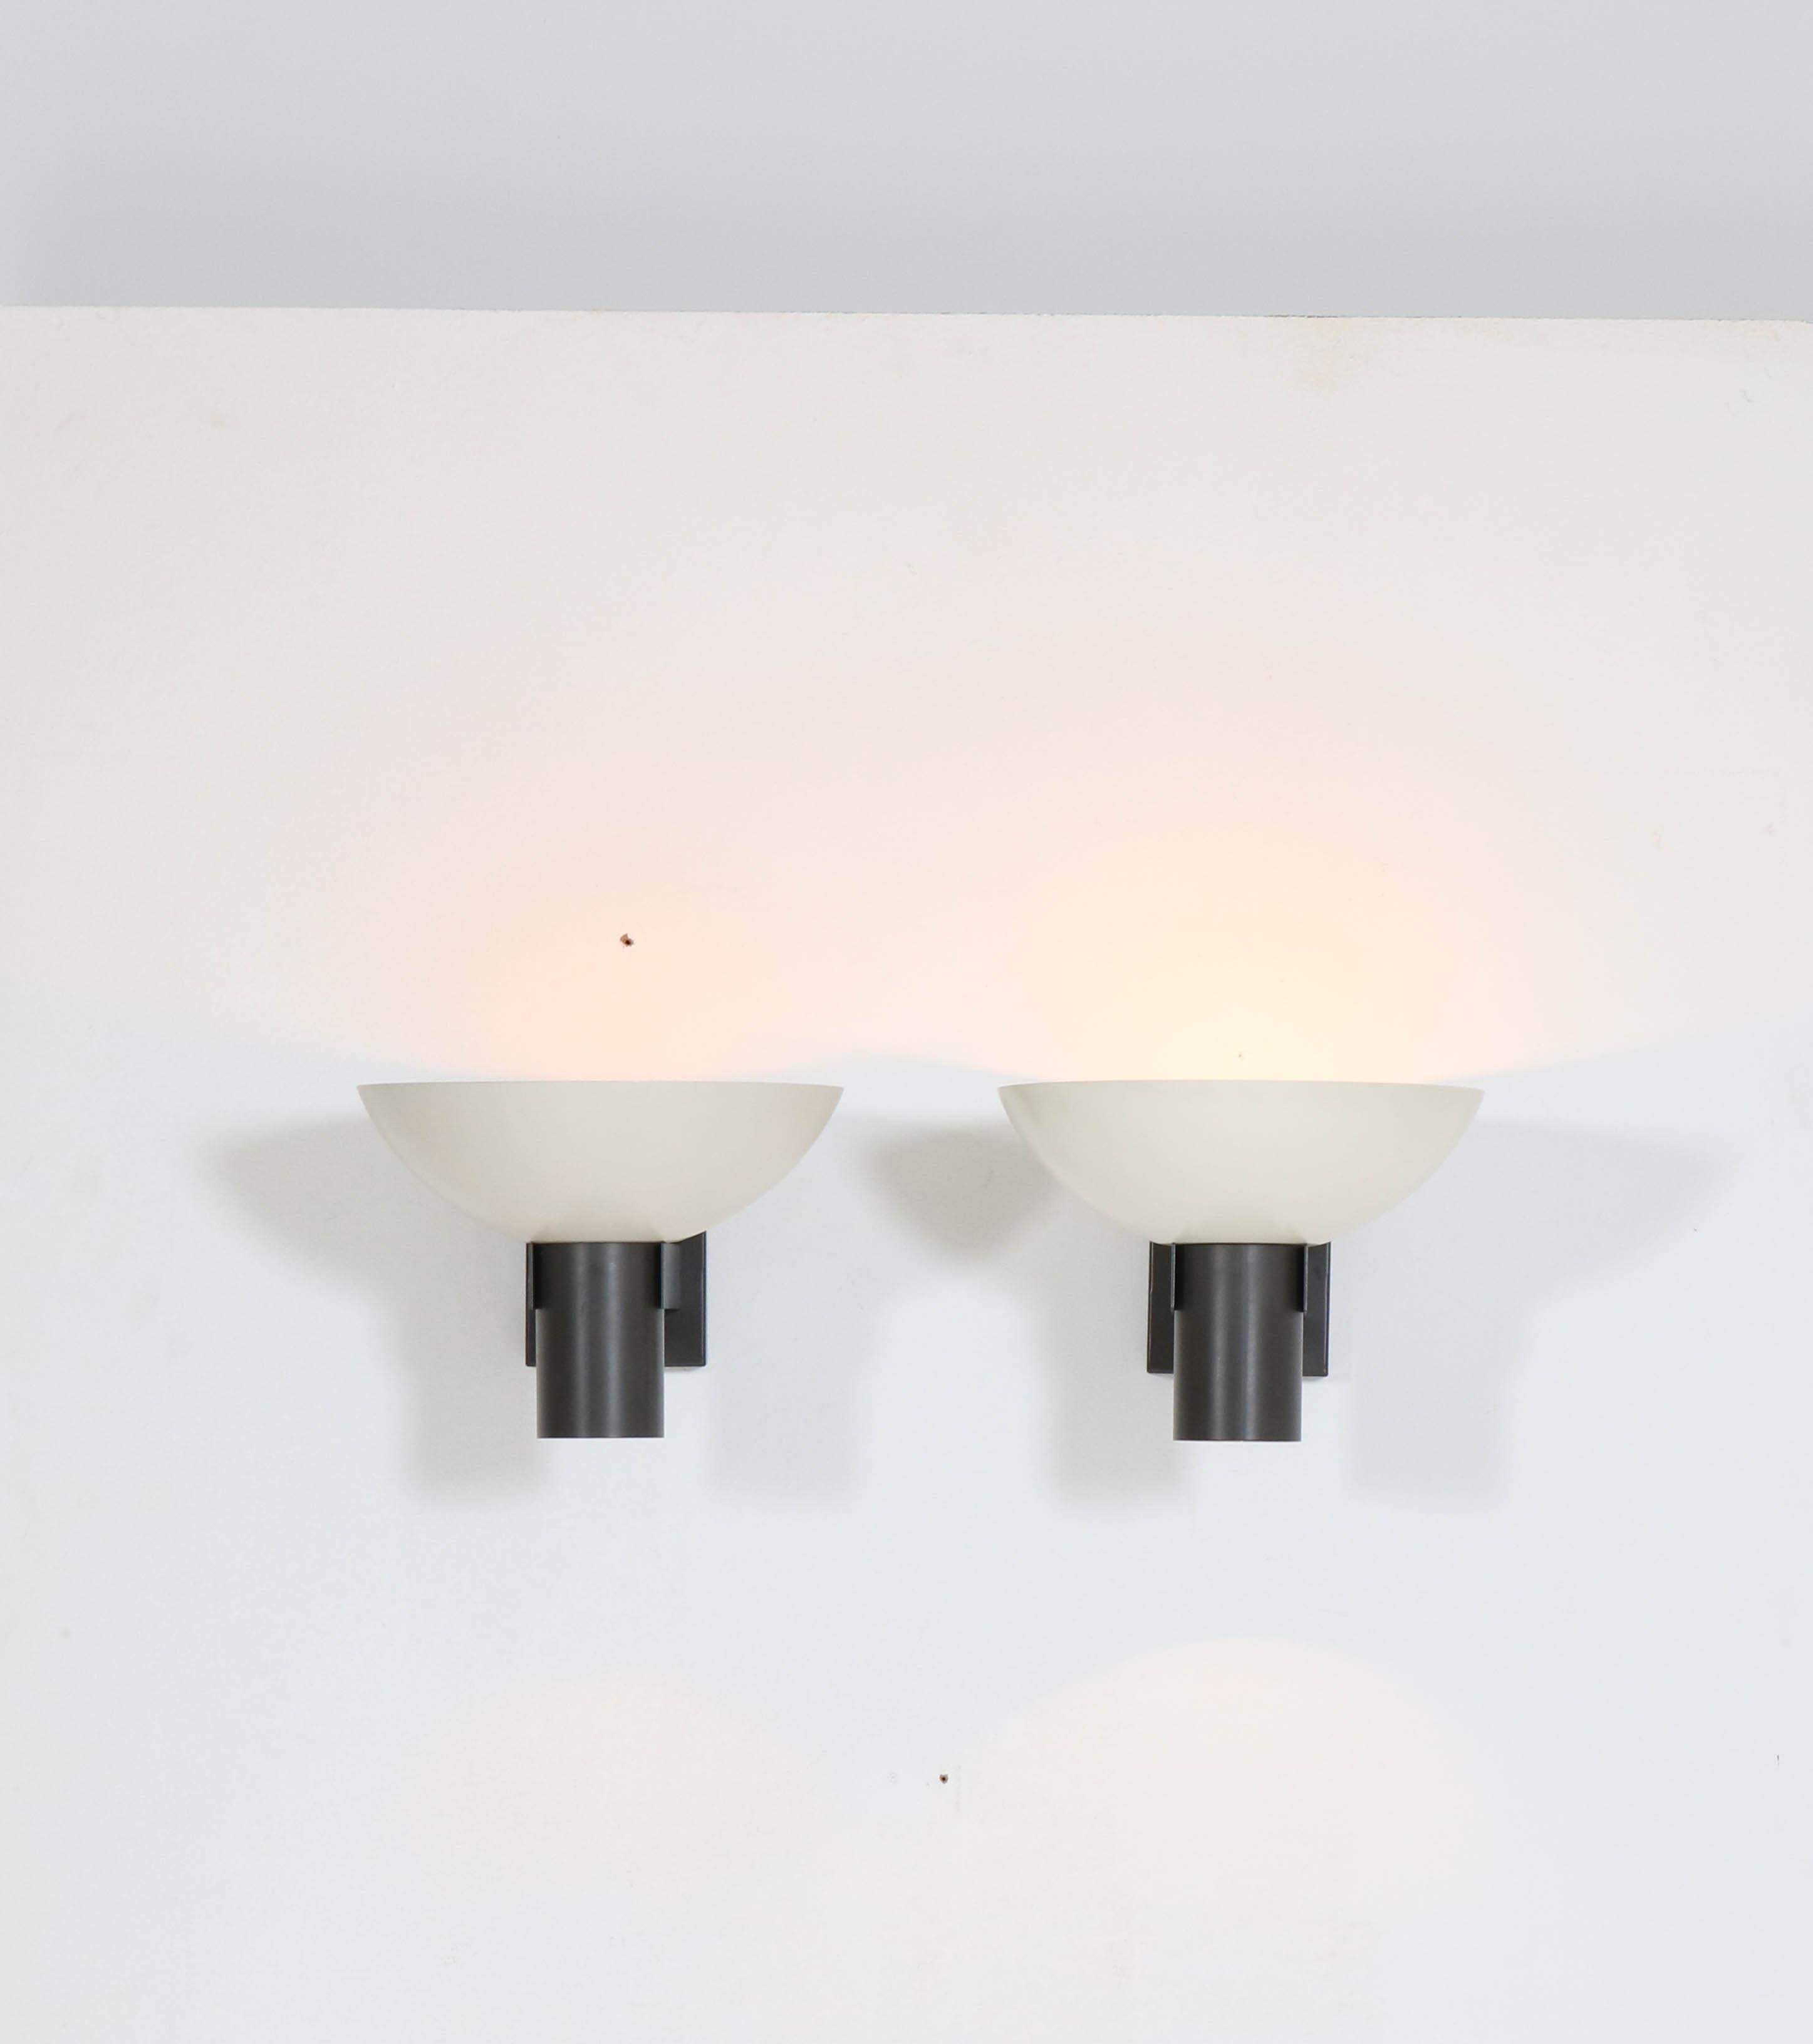 Wonderful pair of Mid-Century Modern wall lights or sconces.
Design by Louis Kalff for Philips.
Striking Dutch design from the 1960s.
Model no: ND 60 D/00.
Lacquered metal with two sockets each for E27 light bulbs.